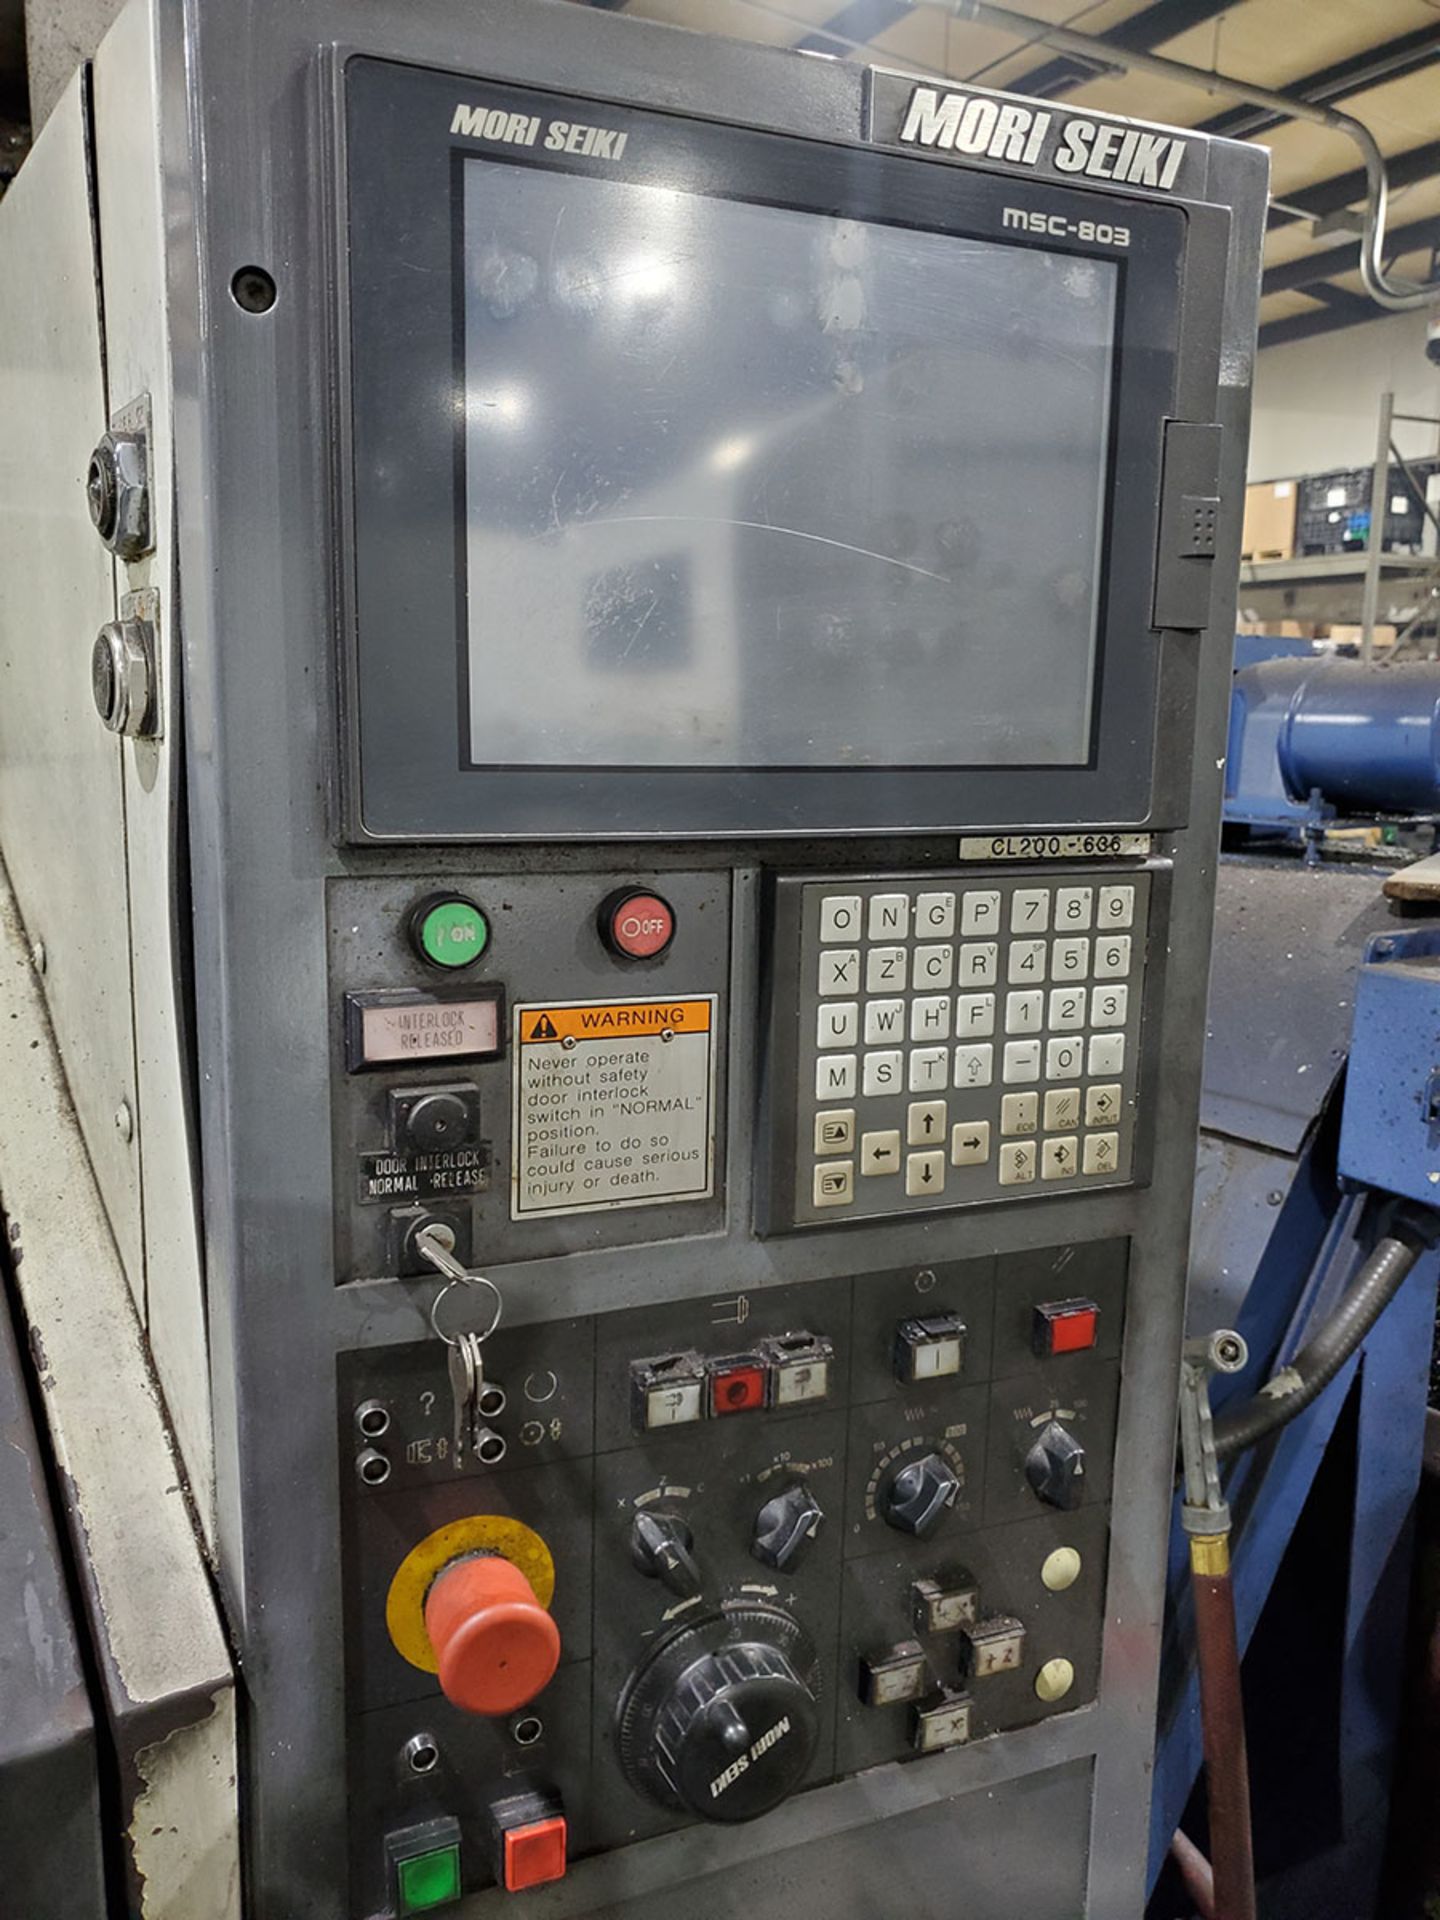 MORI-SEIKI CNC LATHE, MSC-803 DRO CNC CONTROL, MIST COLLECTOR, TURBO OUTFEED INCLINE CHIP - Image 6 of 16